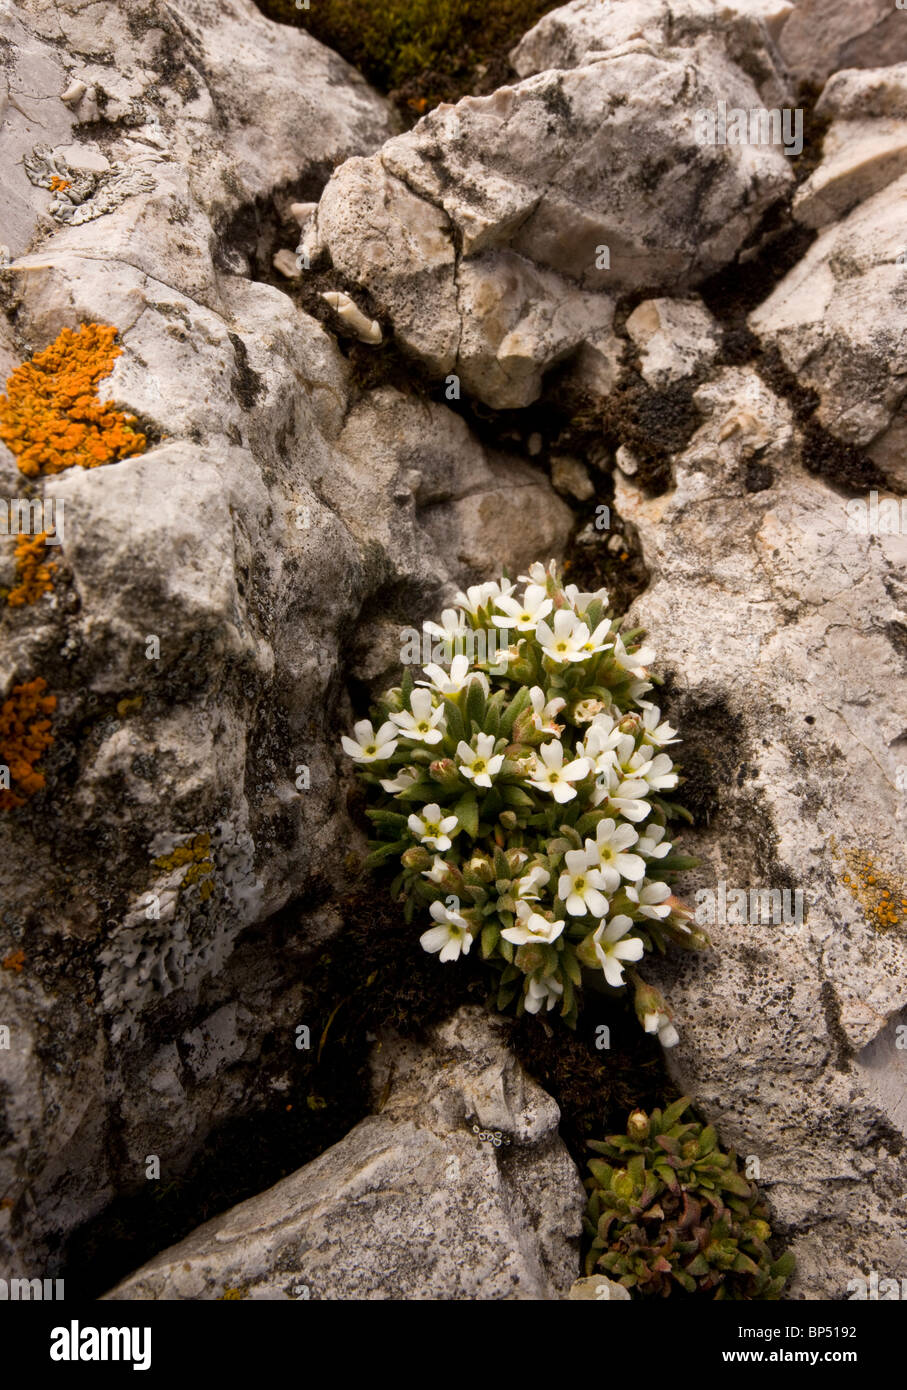 A rare rock-jasmine, Androsace hausmannii in the Dolomites, Italy. Stock Photo